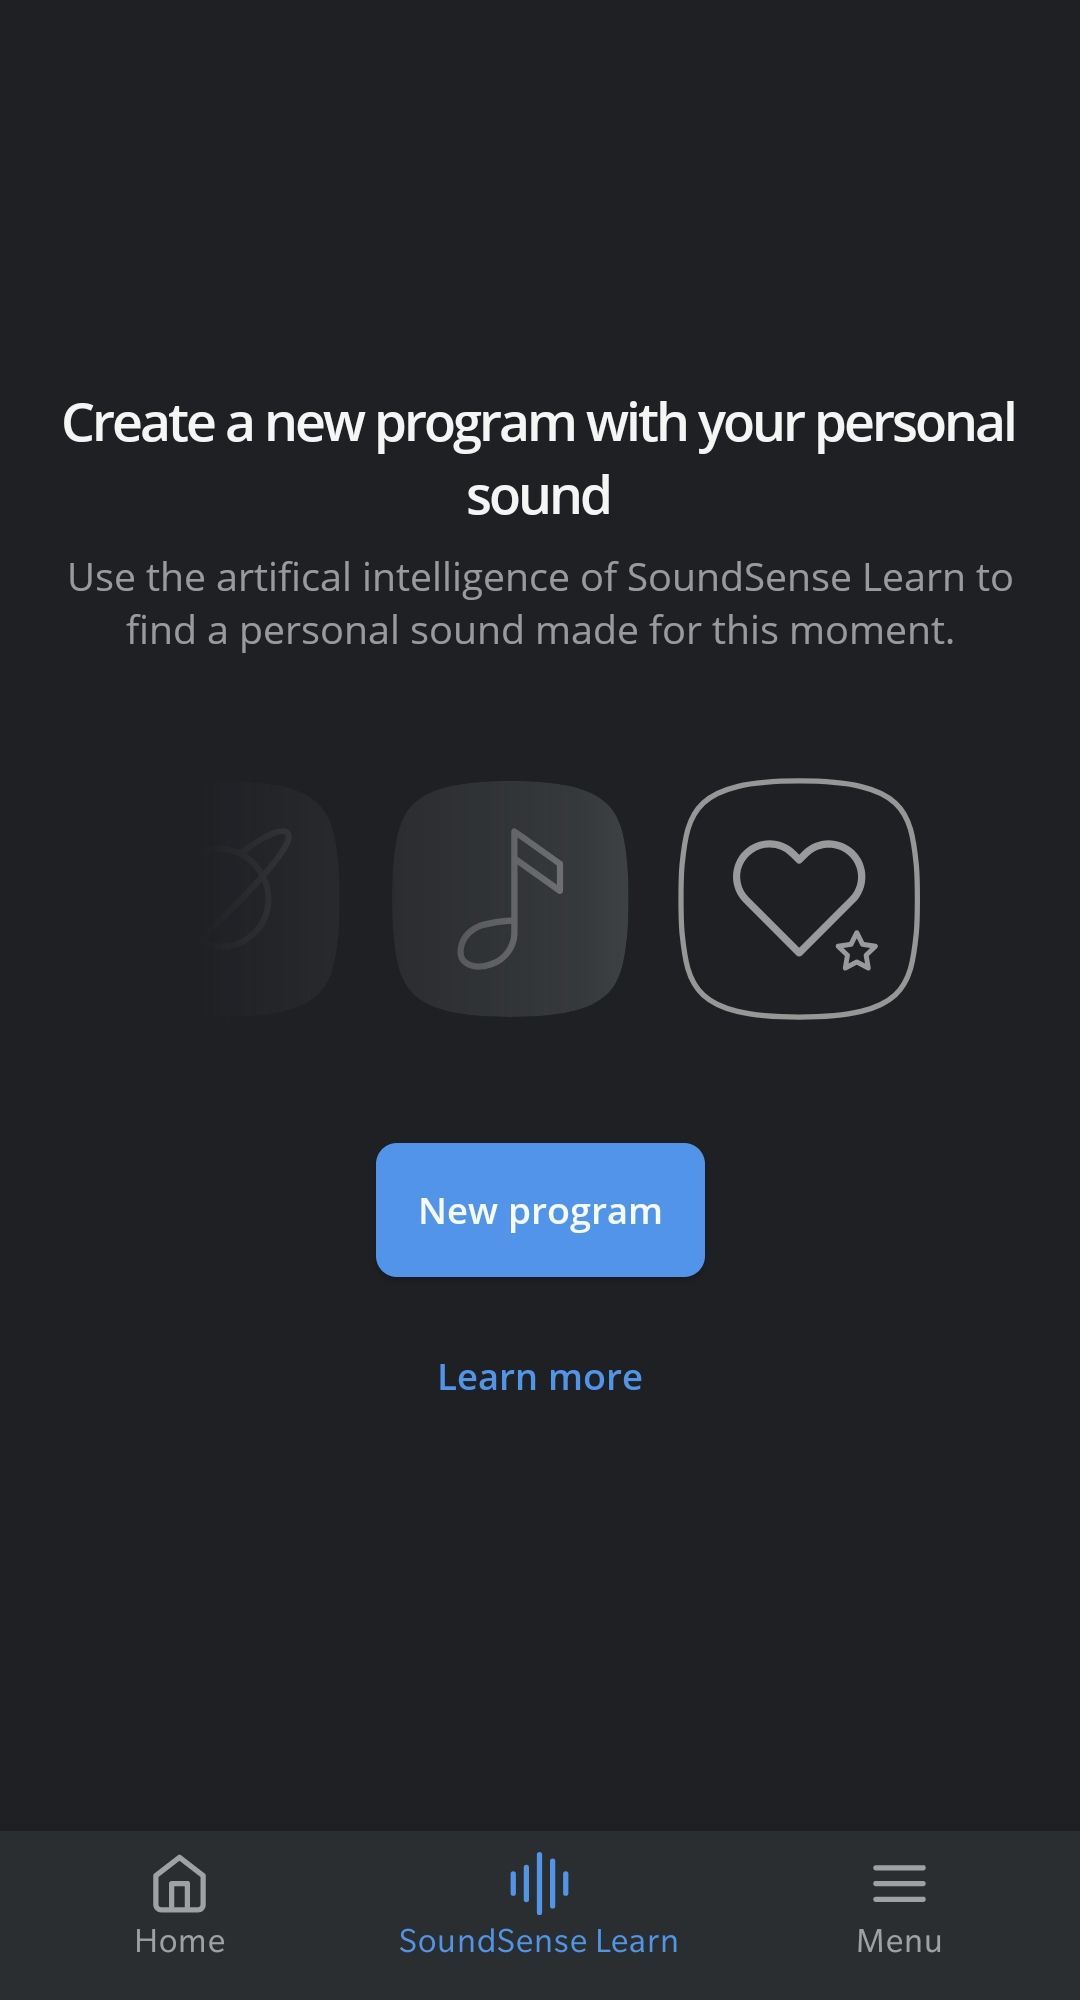 Widex MOMENT starting a new program in the SoundSense Learn tool